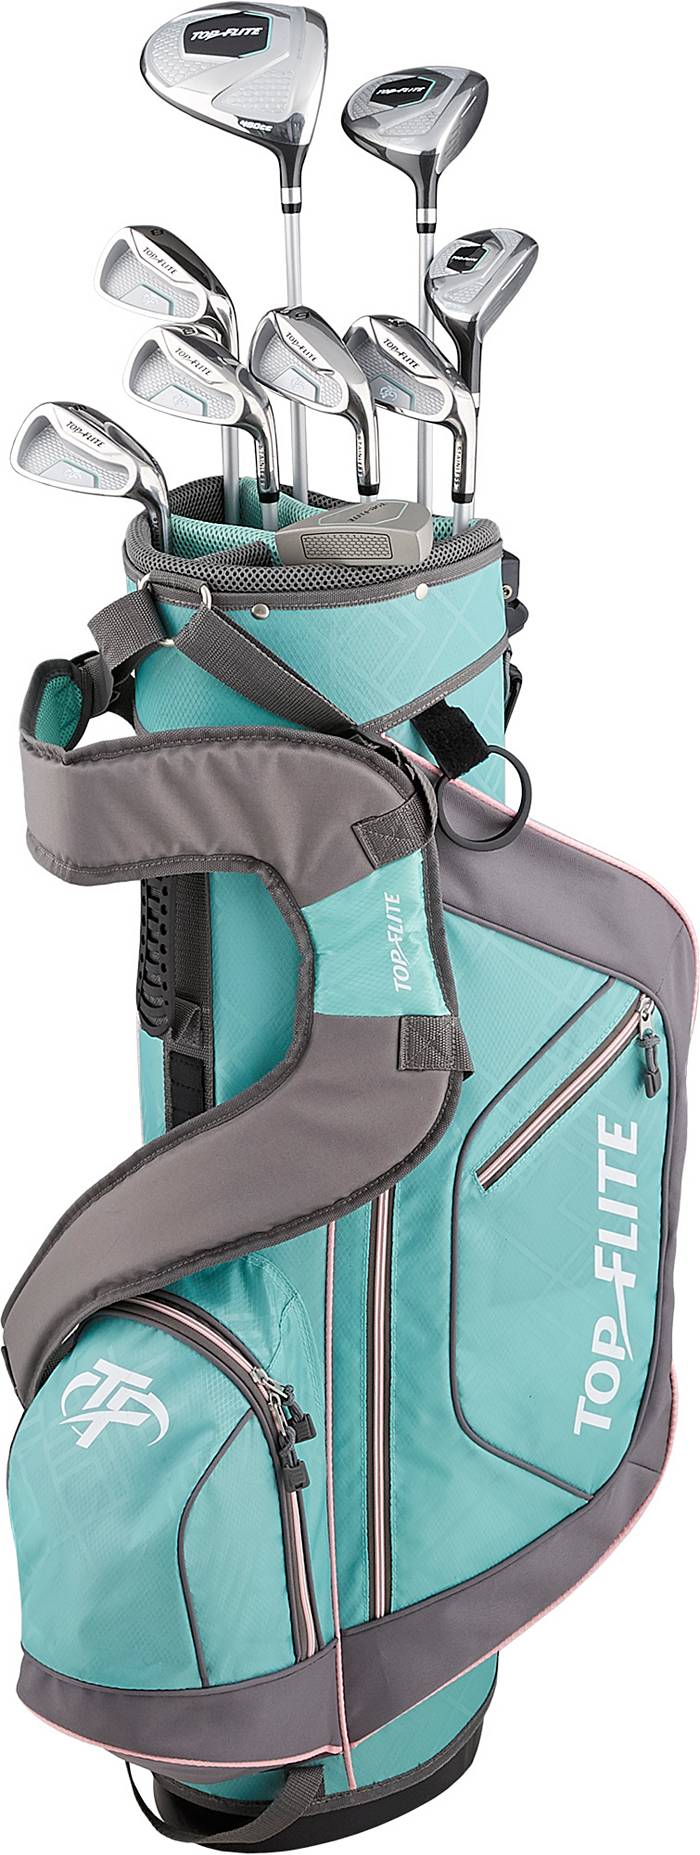 Top Flite Green Gamer X Golf Bag And Clubs READ